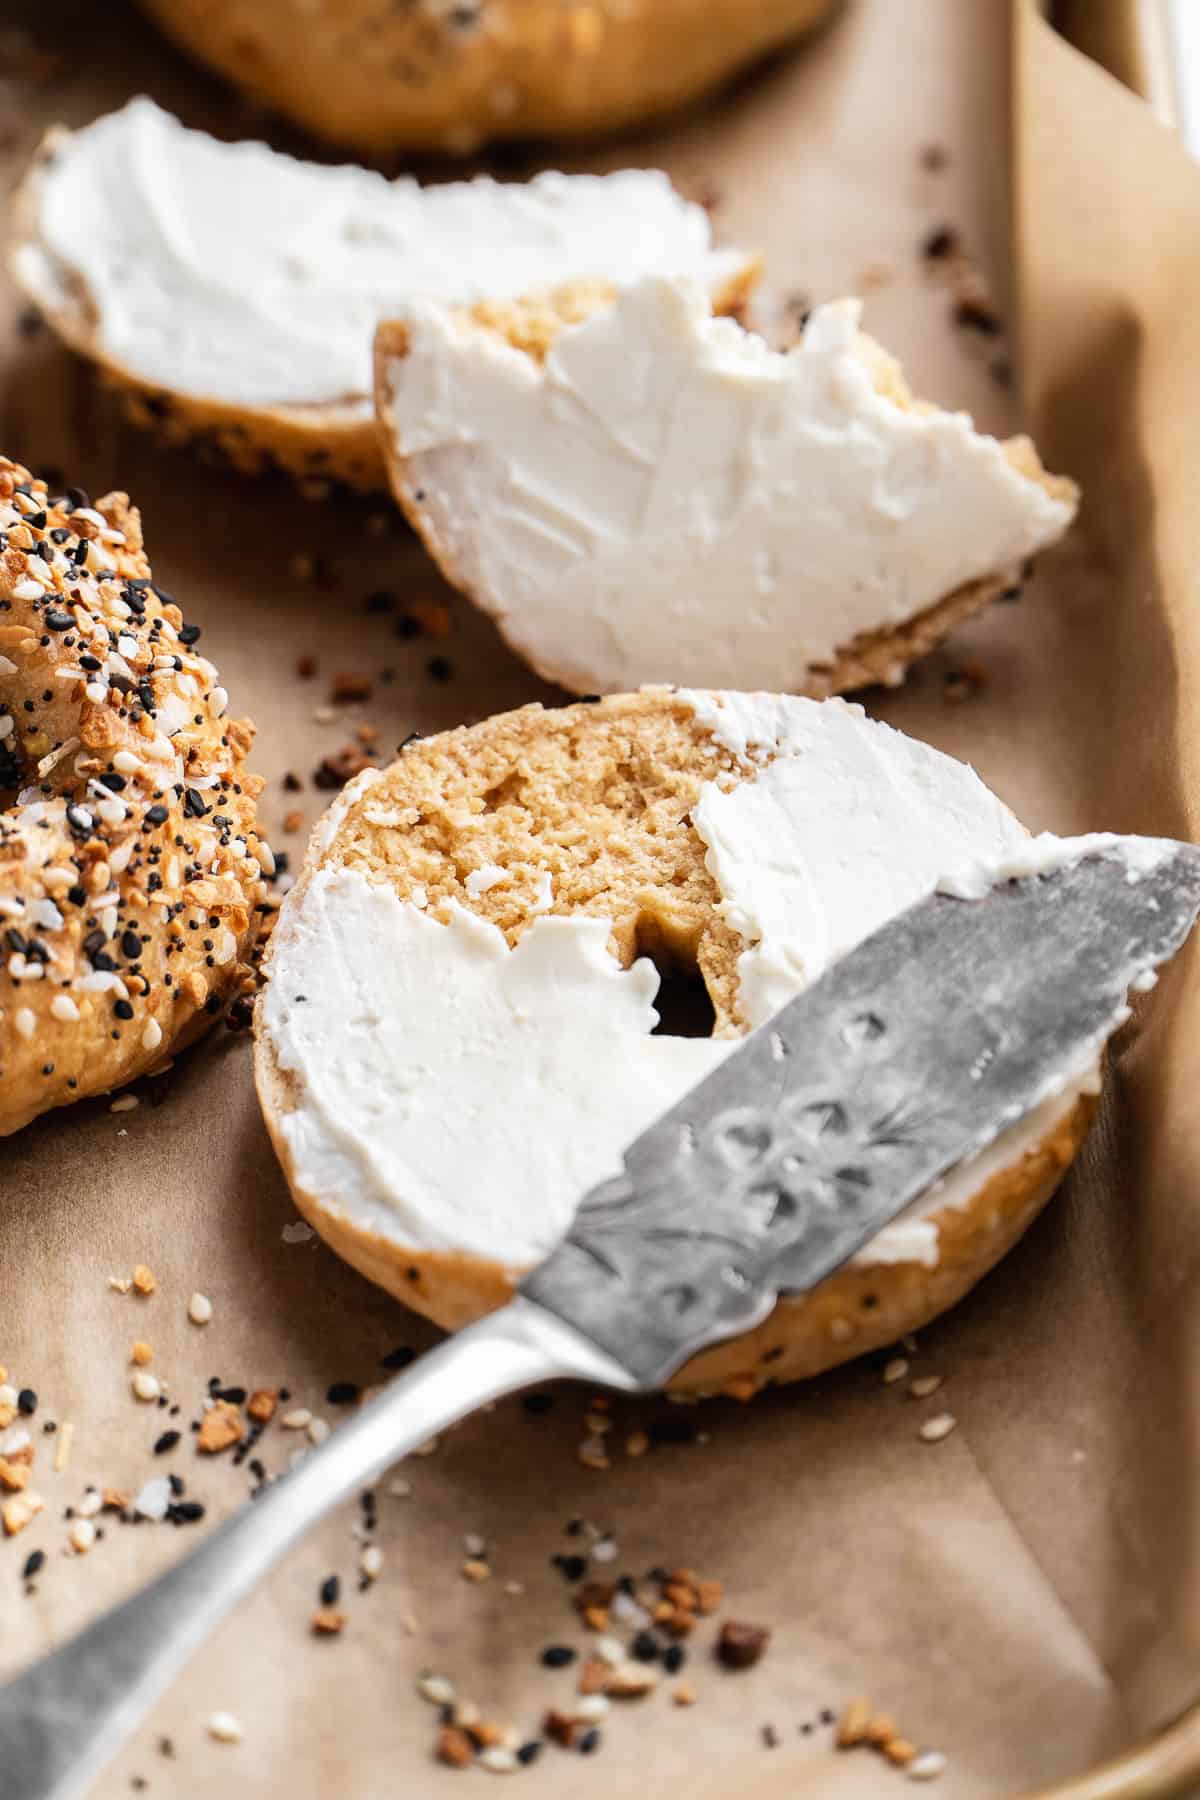 Gluten free everything bagel on a baking sheet with a knife spreading cream cheese on top.